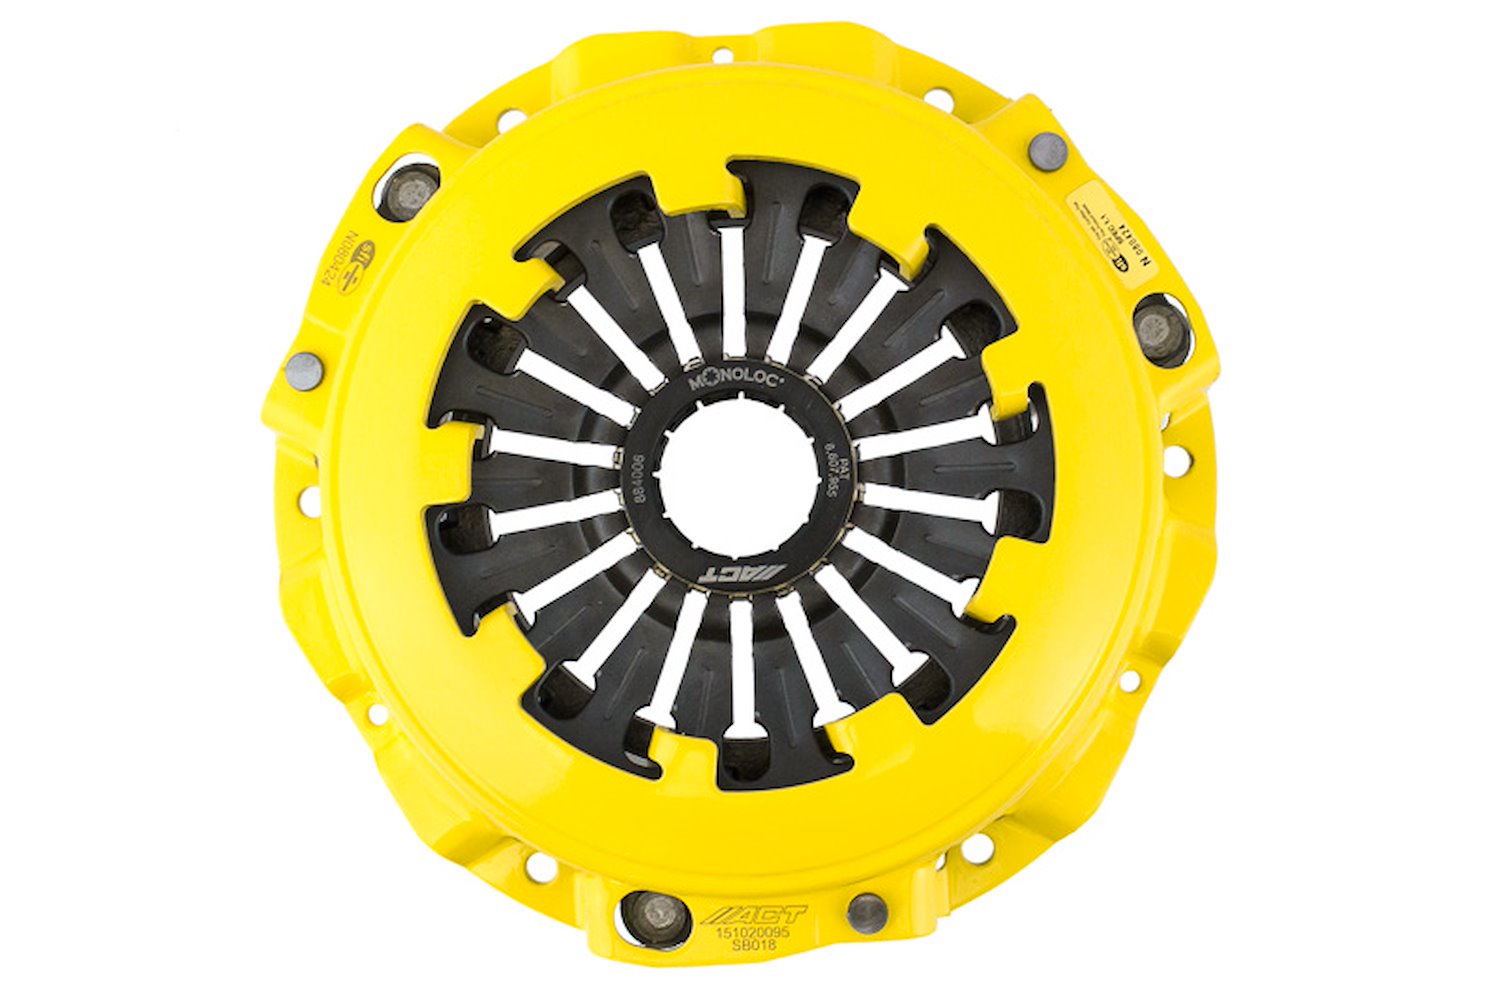 Heavy-Duty Transmission Clutch Pressure Plate Fits Select